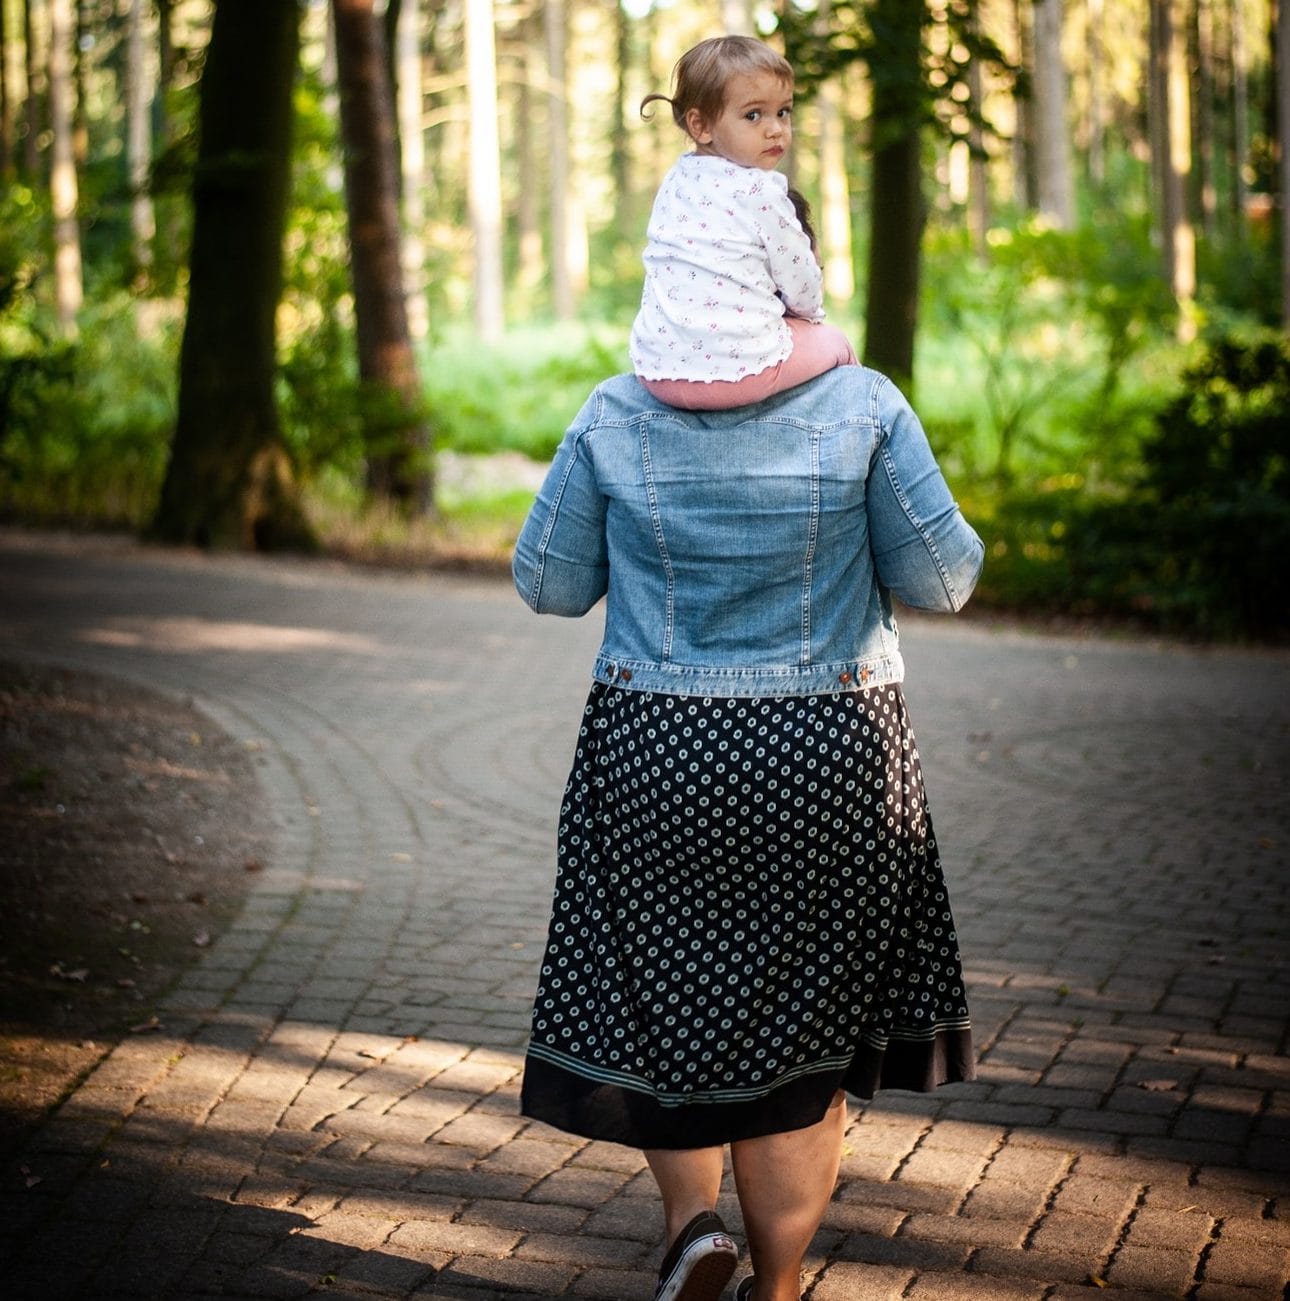 A woman in a denim jacket and polka dot skirt carrying a toddler on her shoulders in a sunlit forest.